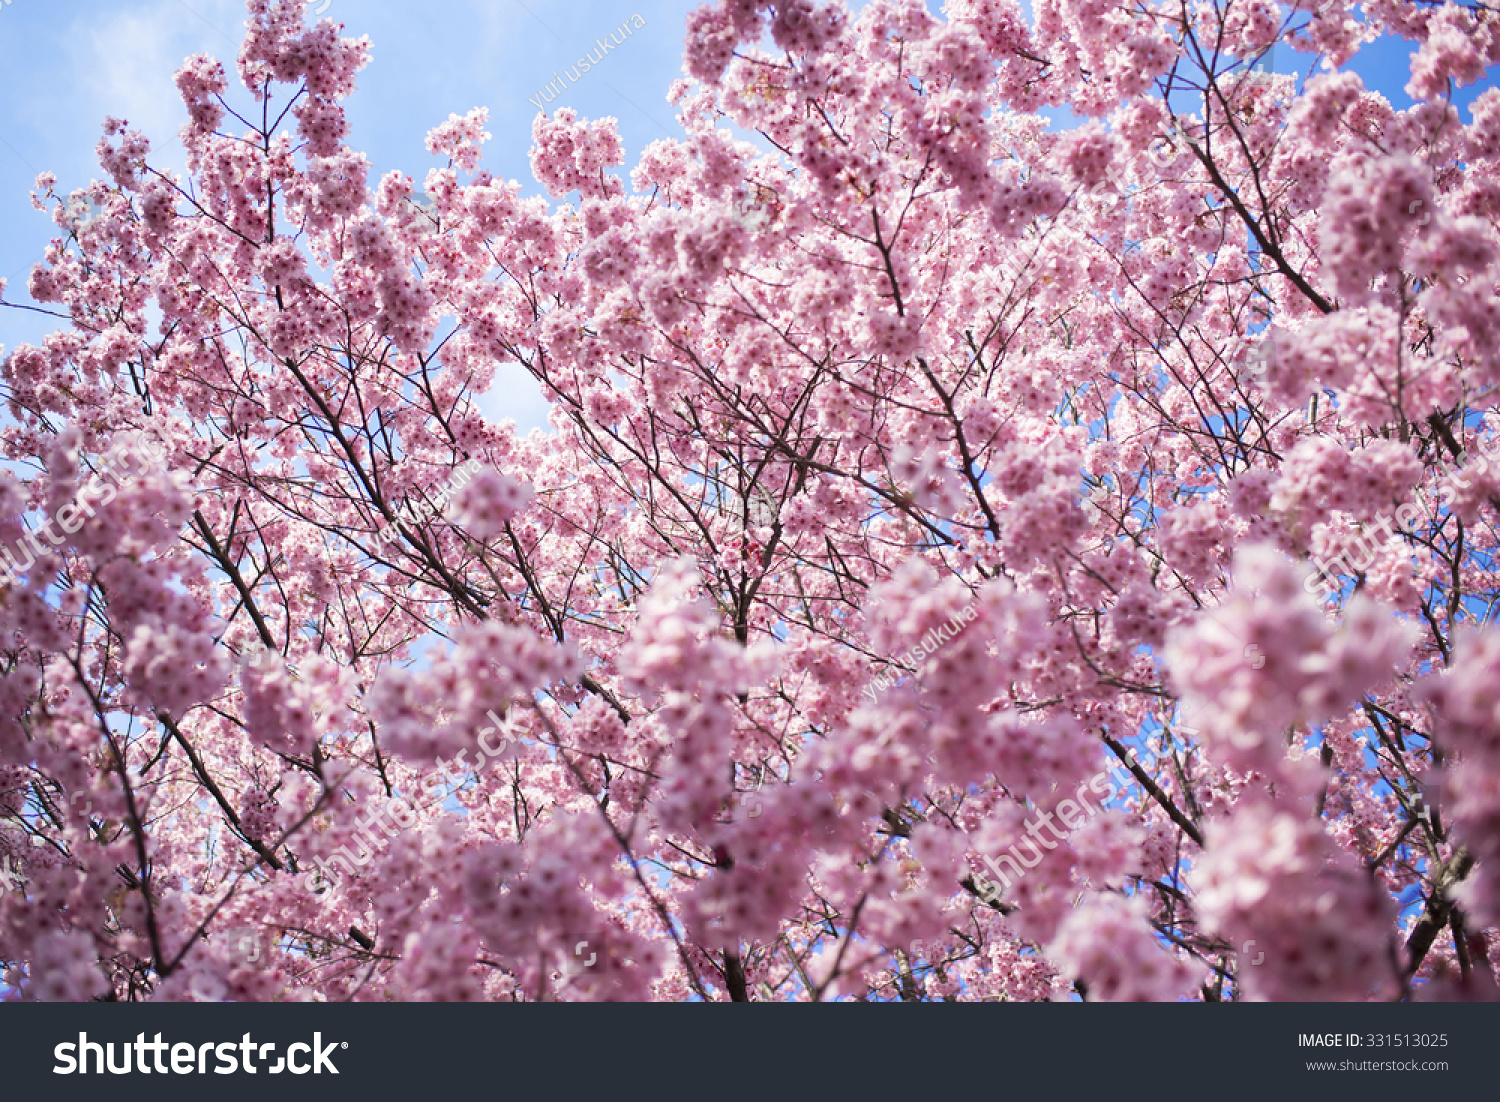 Ful-Bloomed Cherry Blossom Over Blue Sky Background Stock Photo ...